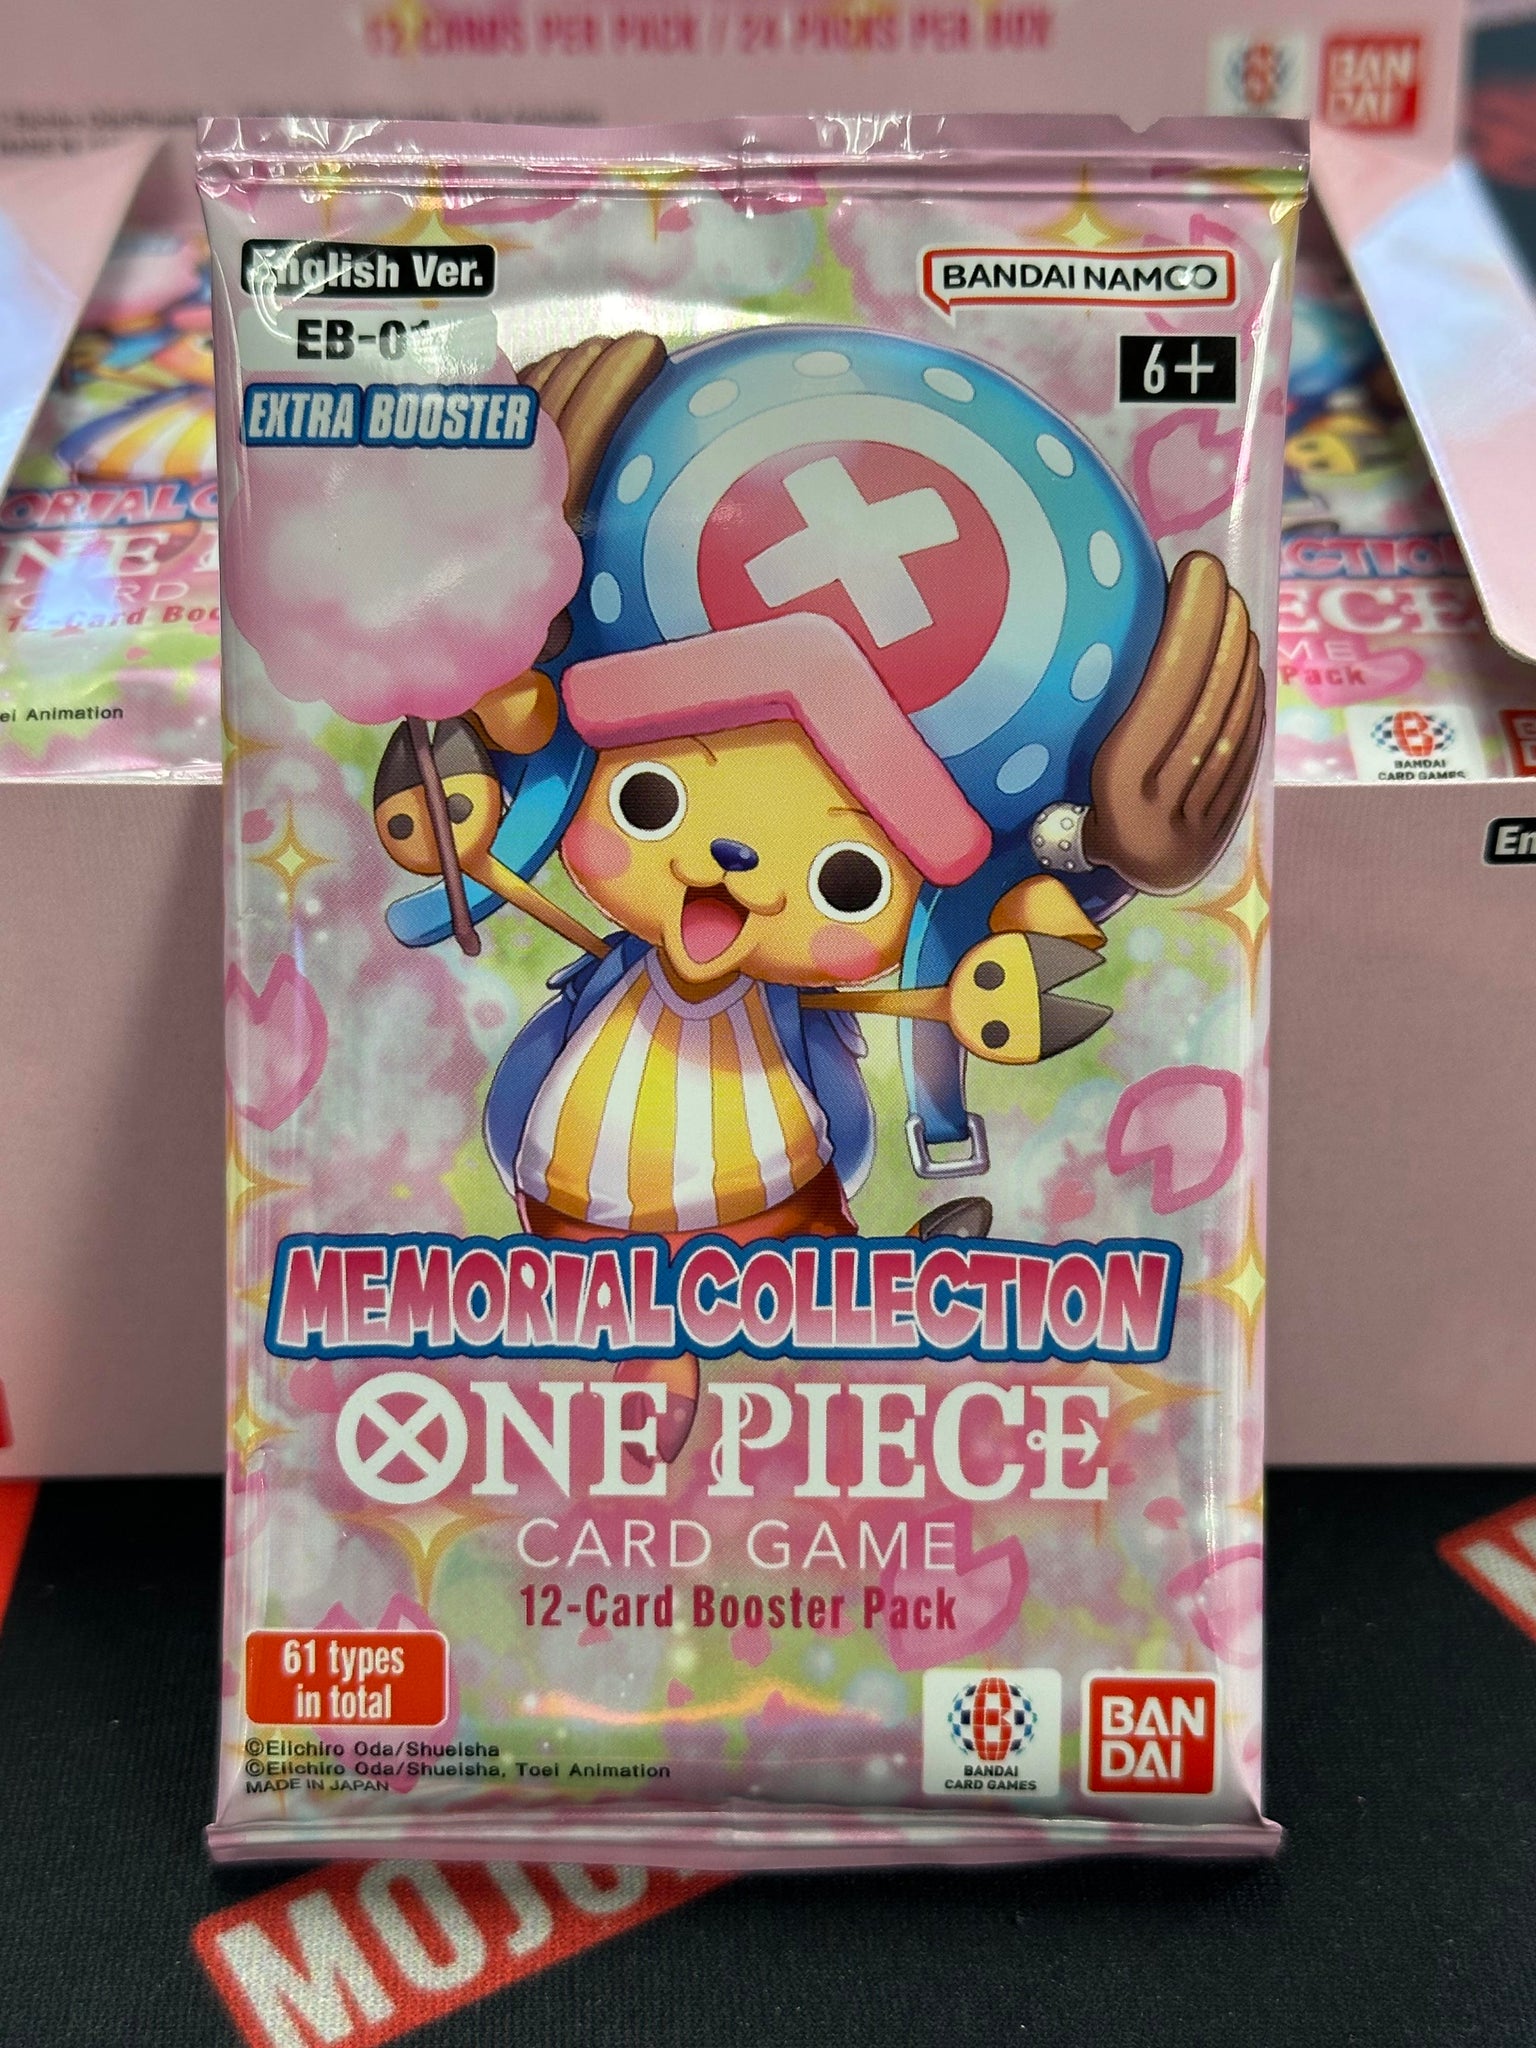 One Piece: Memorial Collection Single Pack